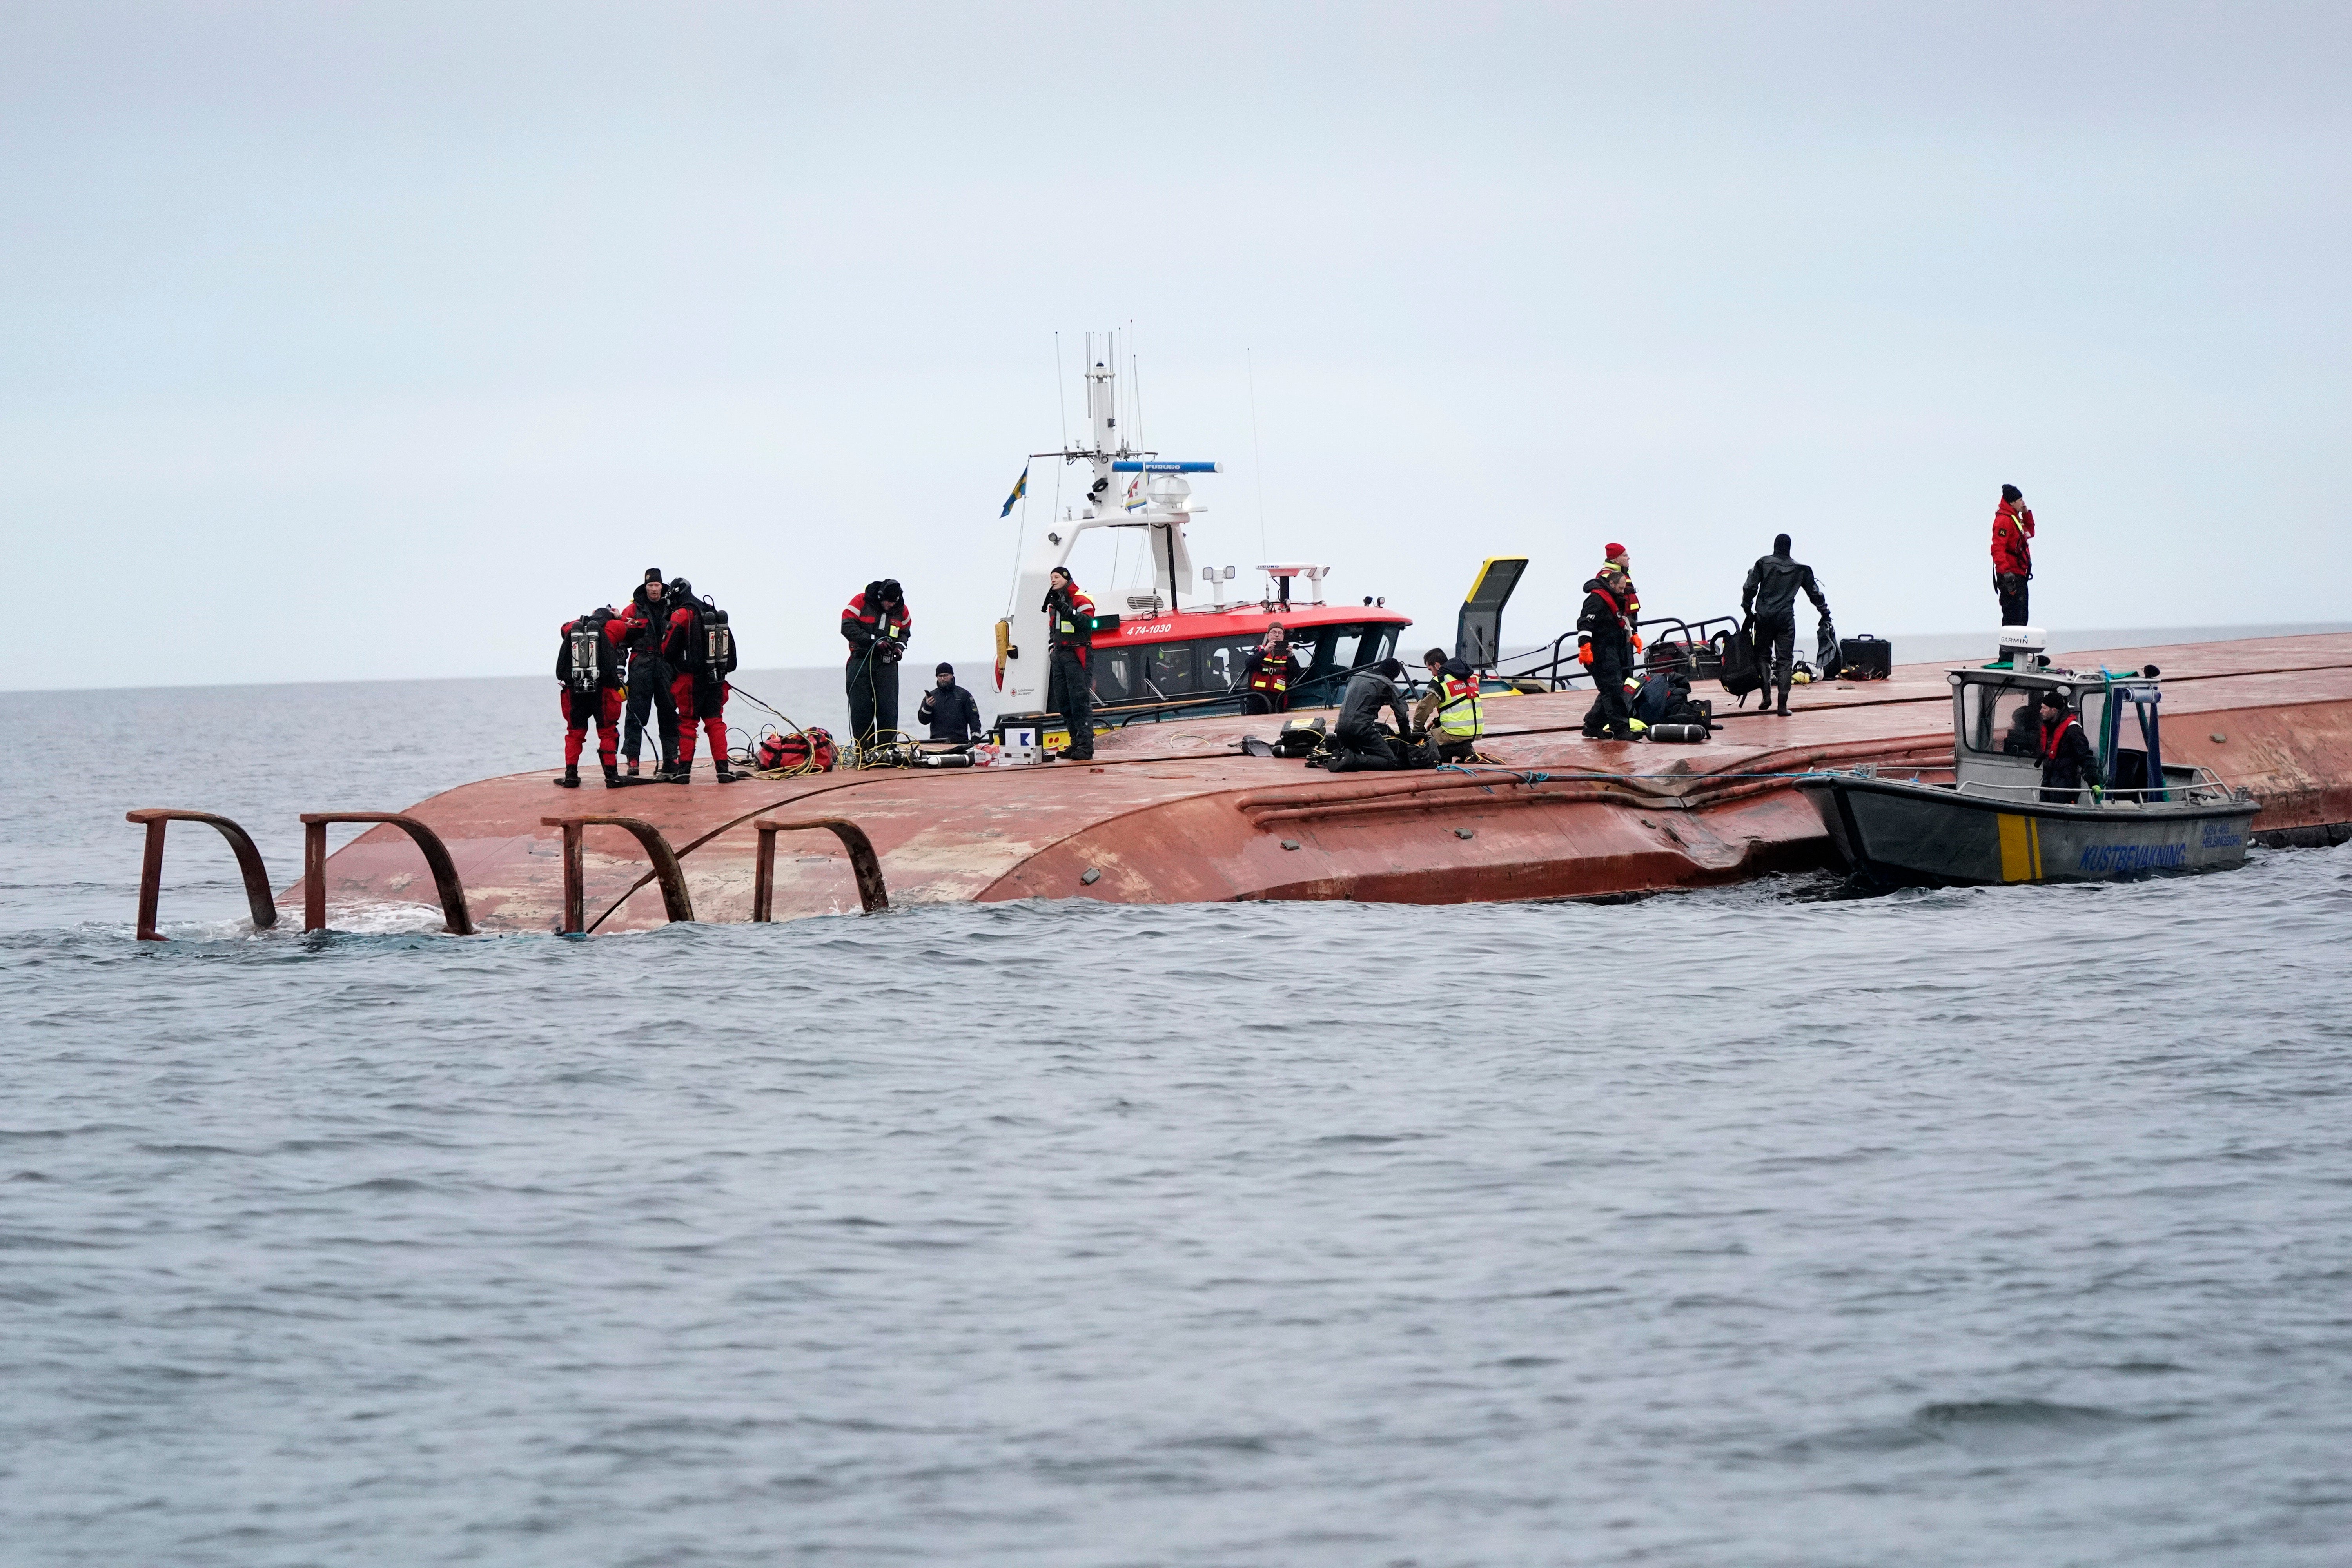 Divers work on the capsized Danish cargo ship Karin Hoej, right, after it collided with British cargo vessel Scot Carrier in Sweden, on 13 December, 2021